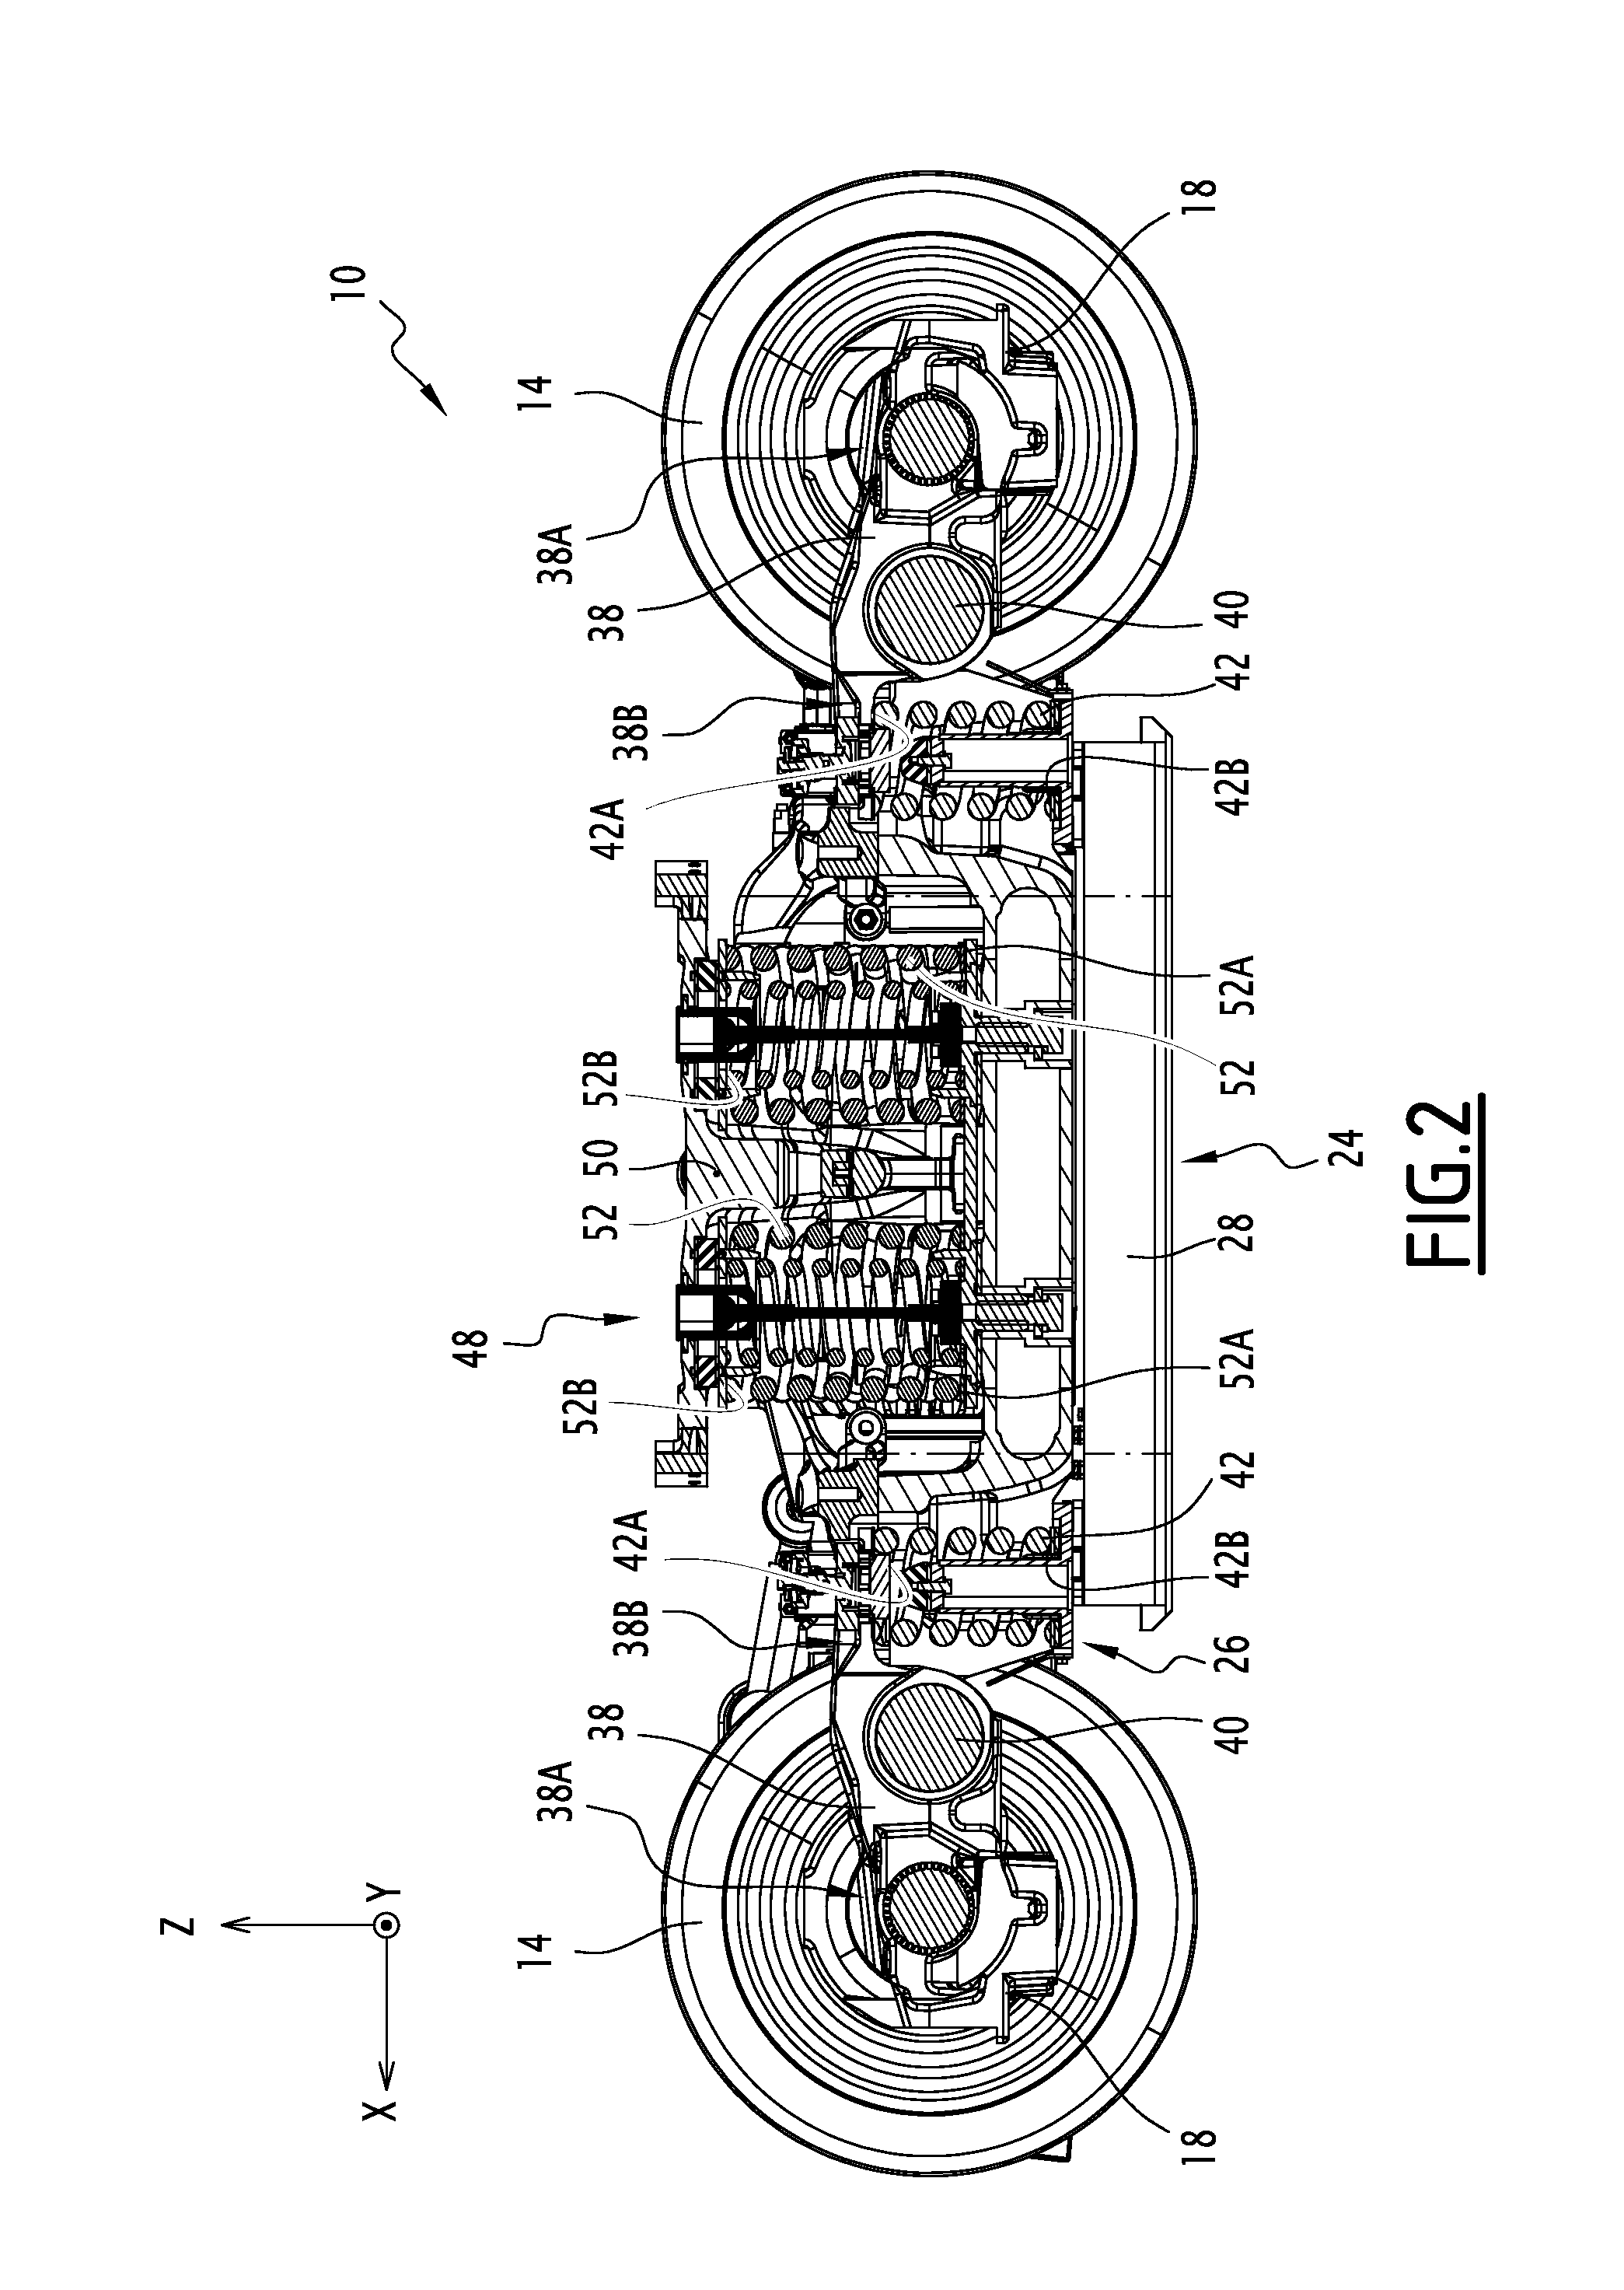 Bogie for Railway Vehicle with a Suspension System